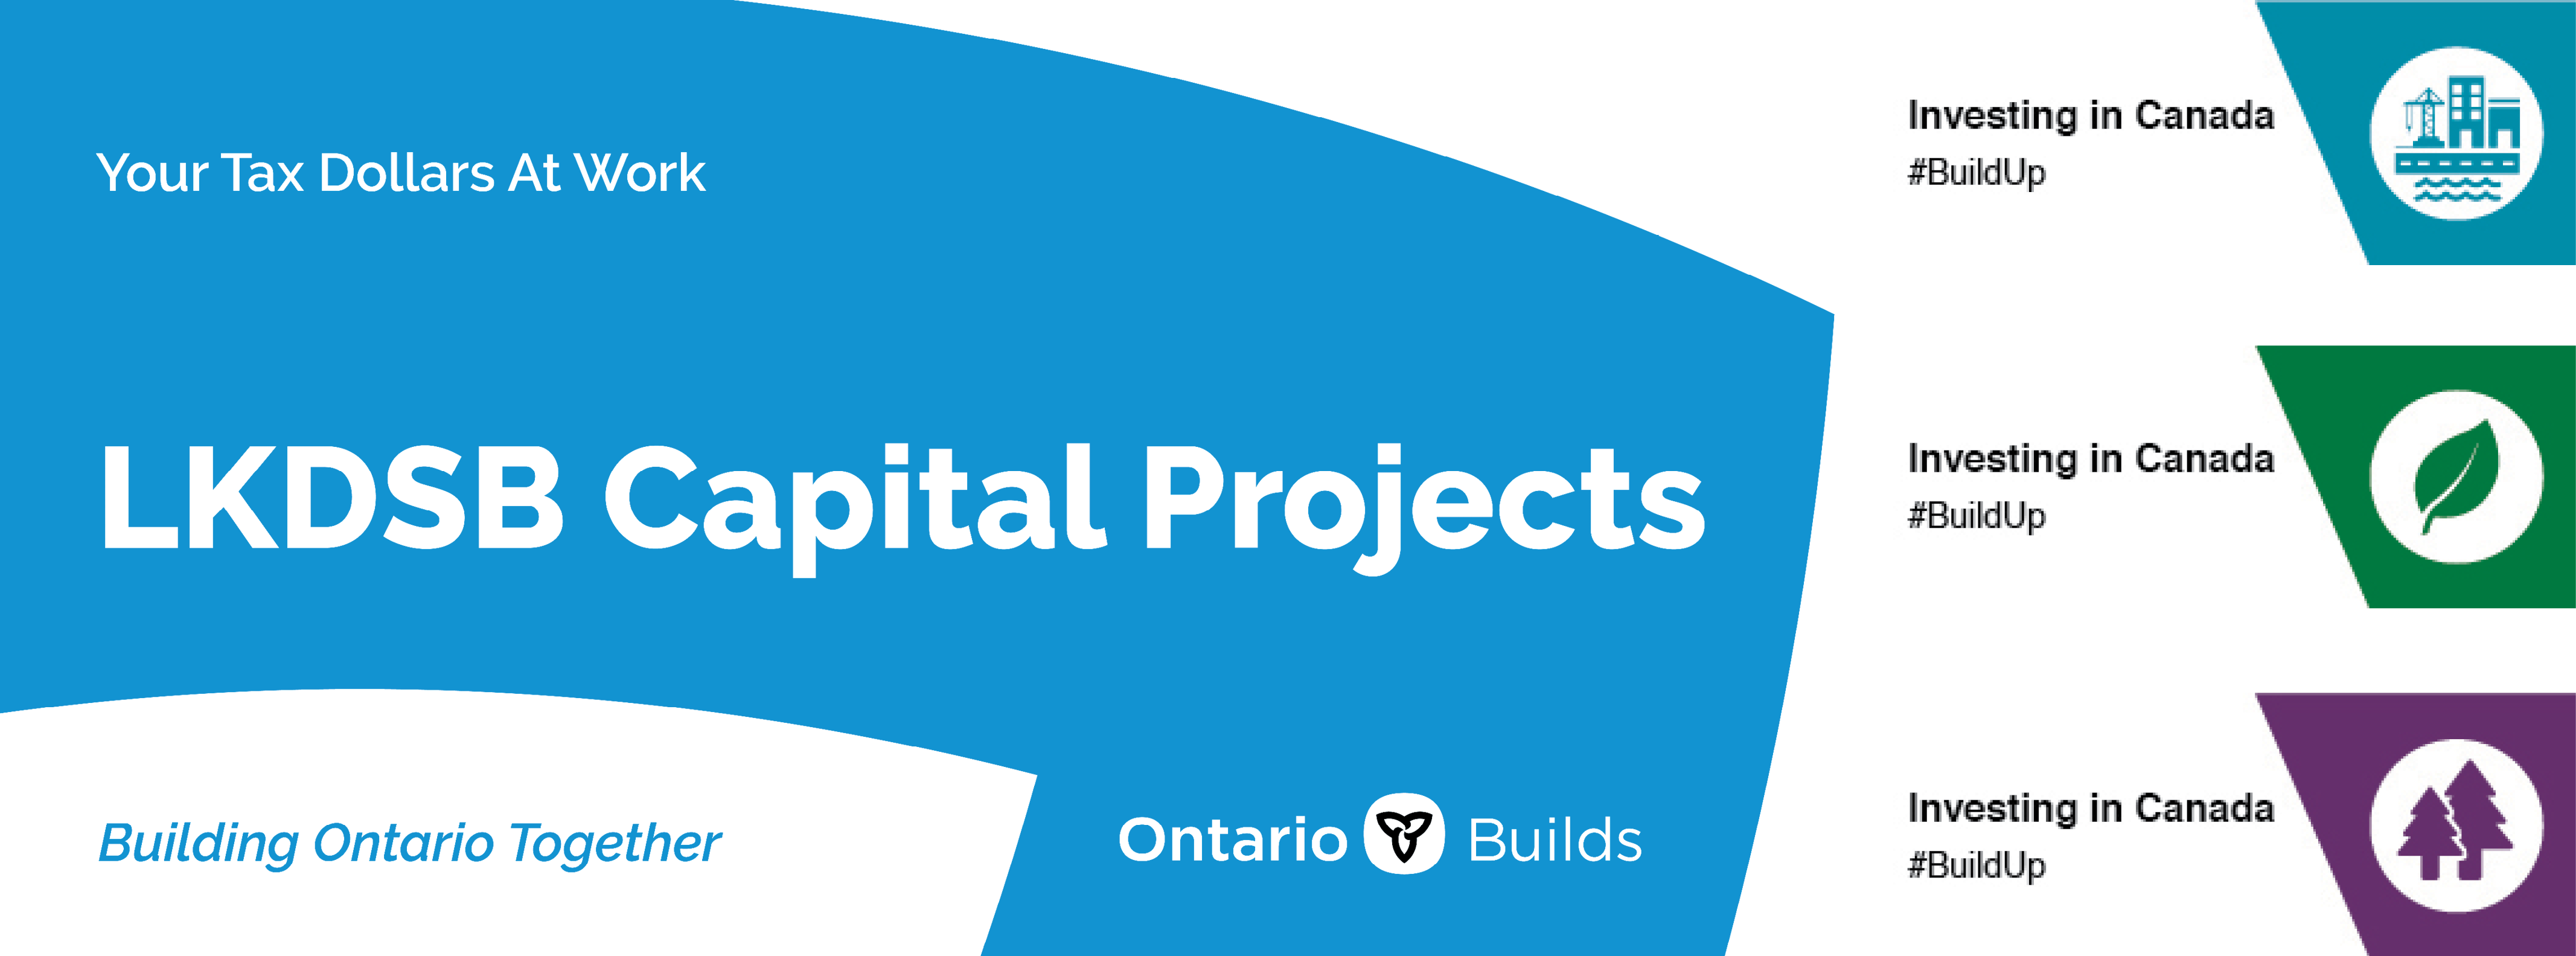 Capital Projects website banner.png